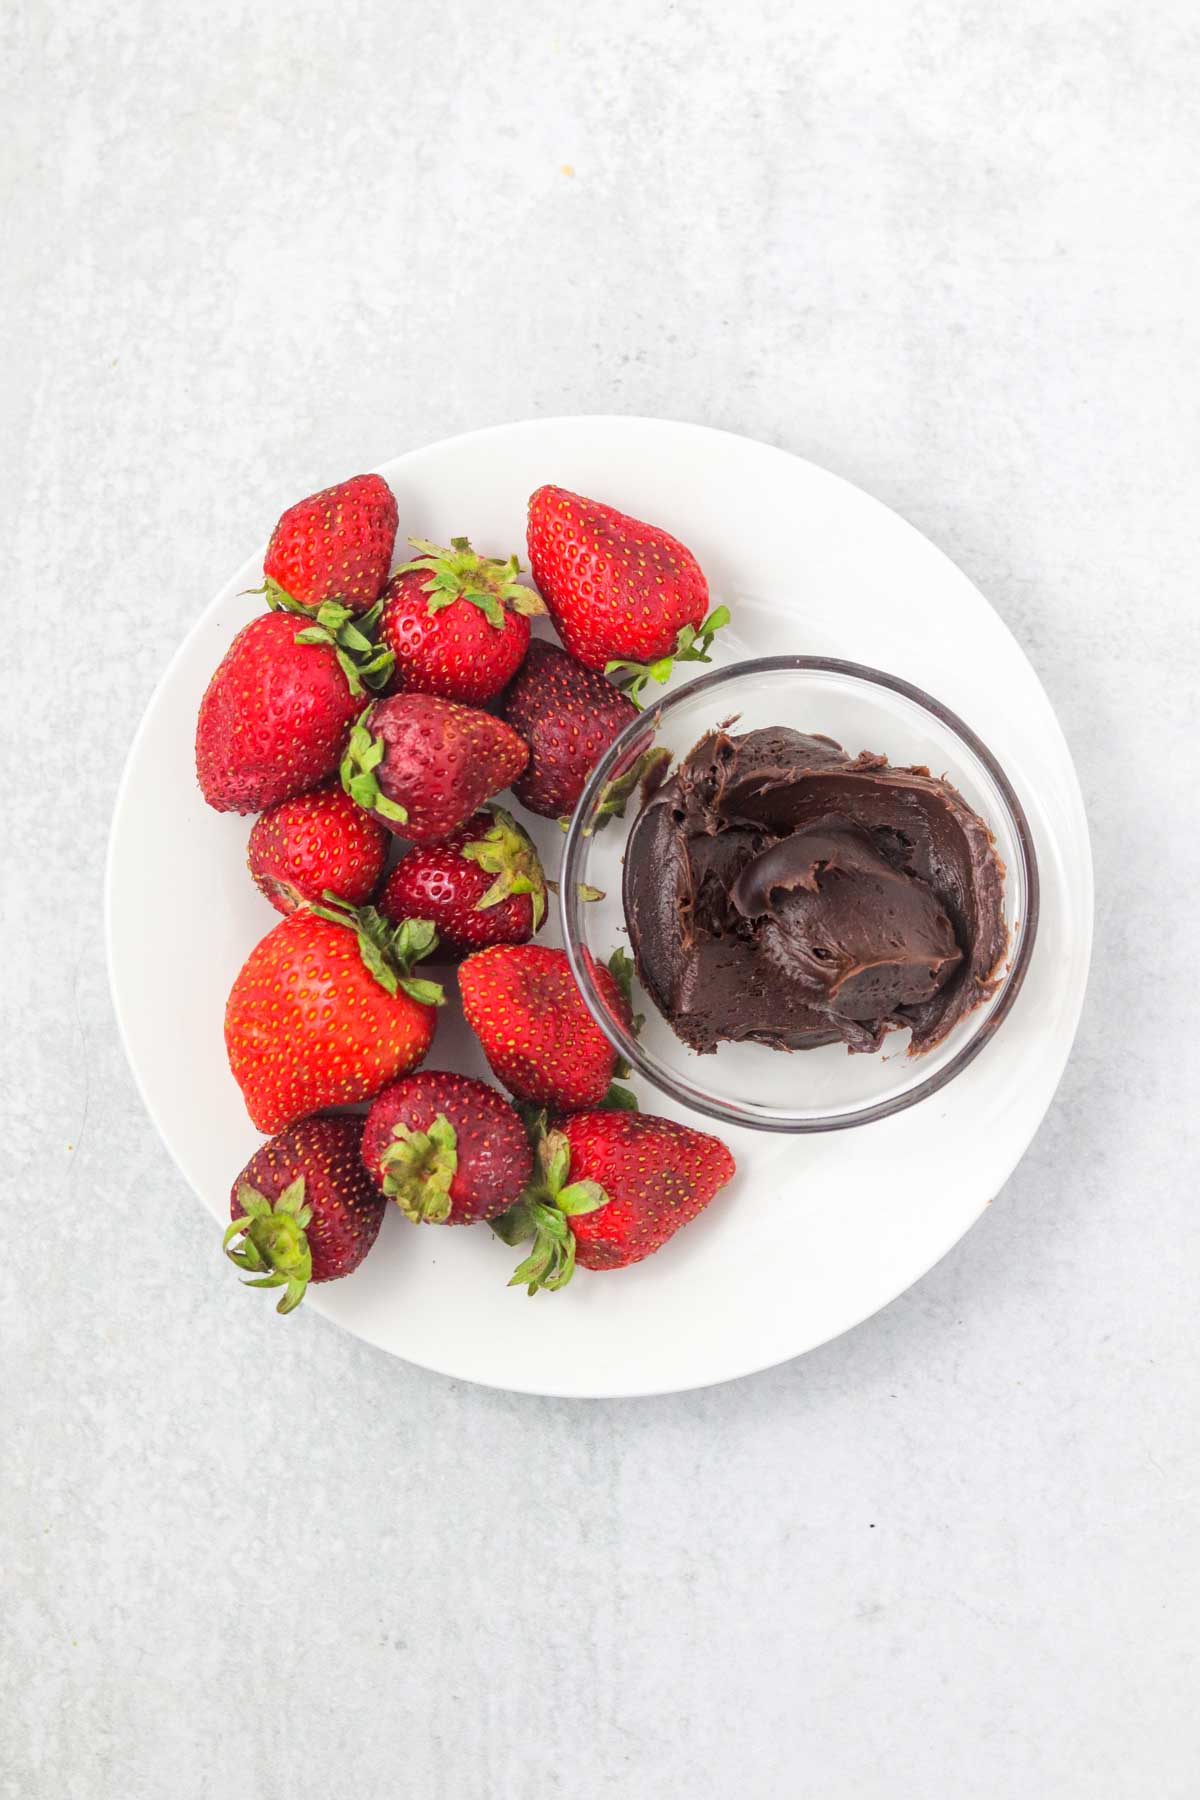 Strawberries + Chocolate Frosting